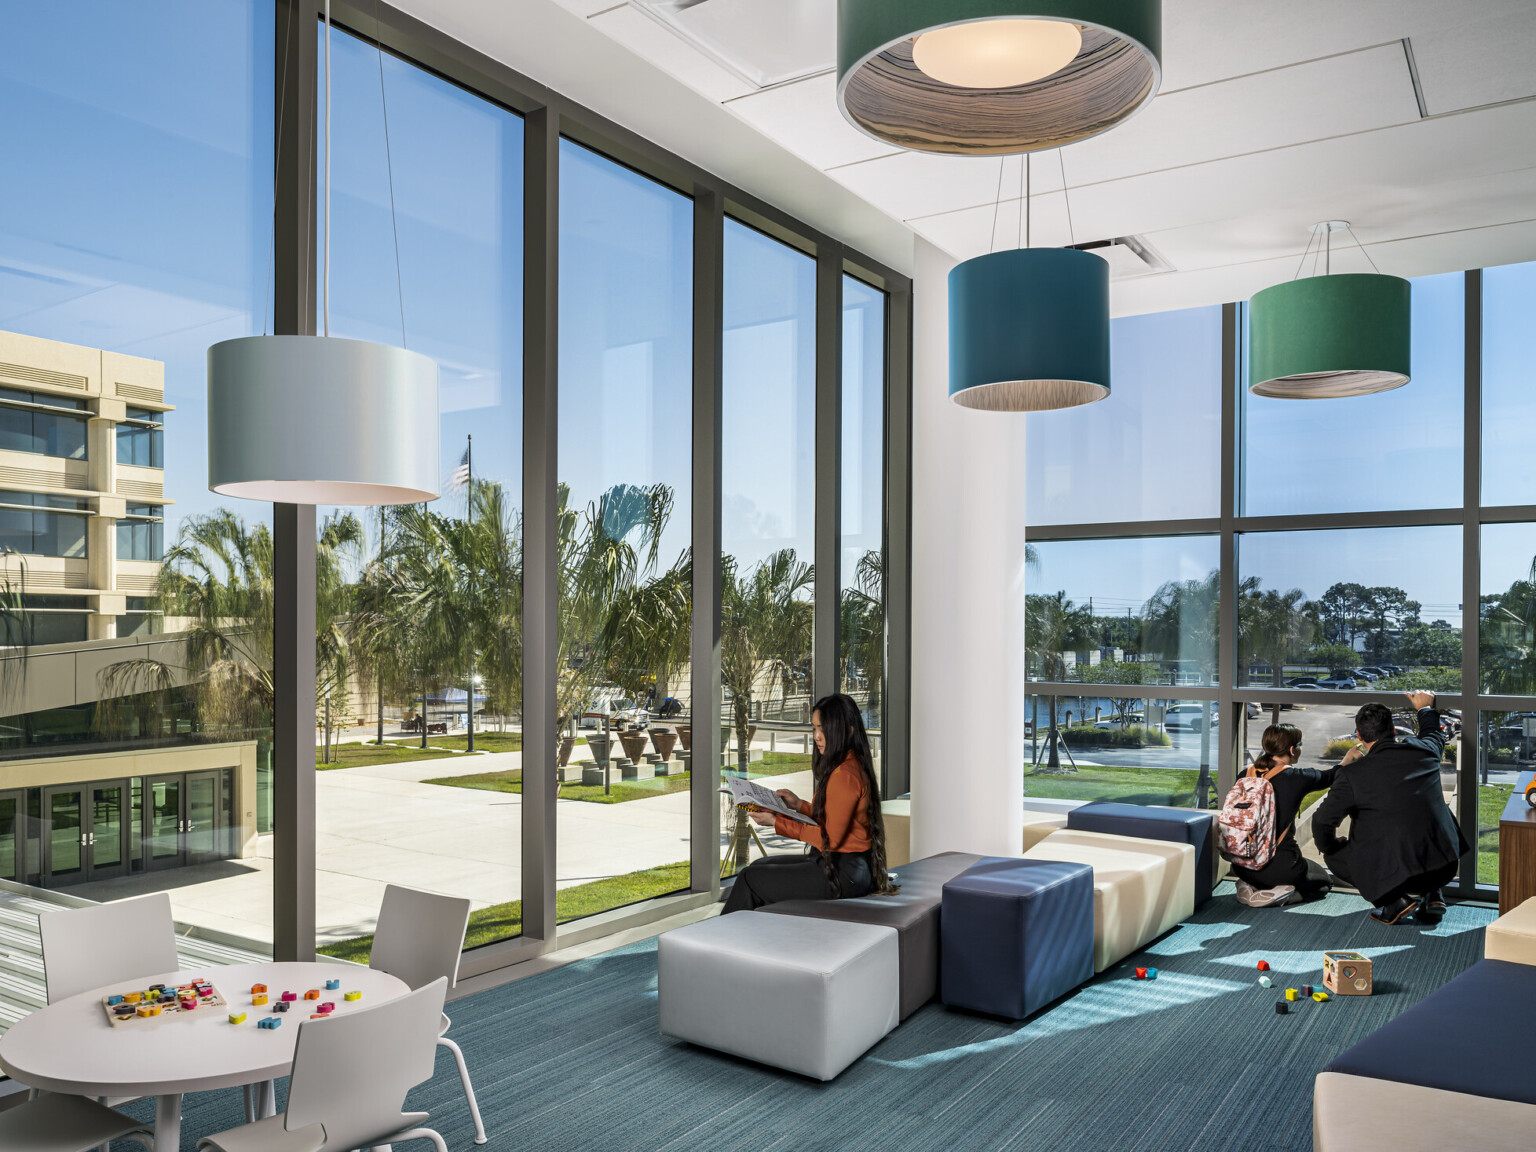 courthouse family area, high-ceilings, floor-to-ceiling windows fill all walls provide natural light, soothing blues and greens for flooring, modular seating areas, barrel lamps overhead with blue and green shades